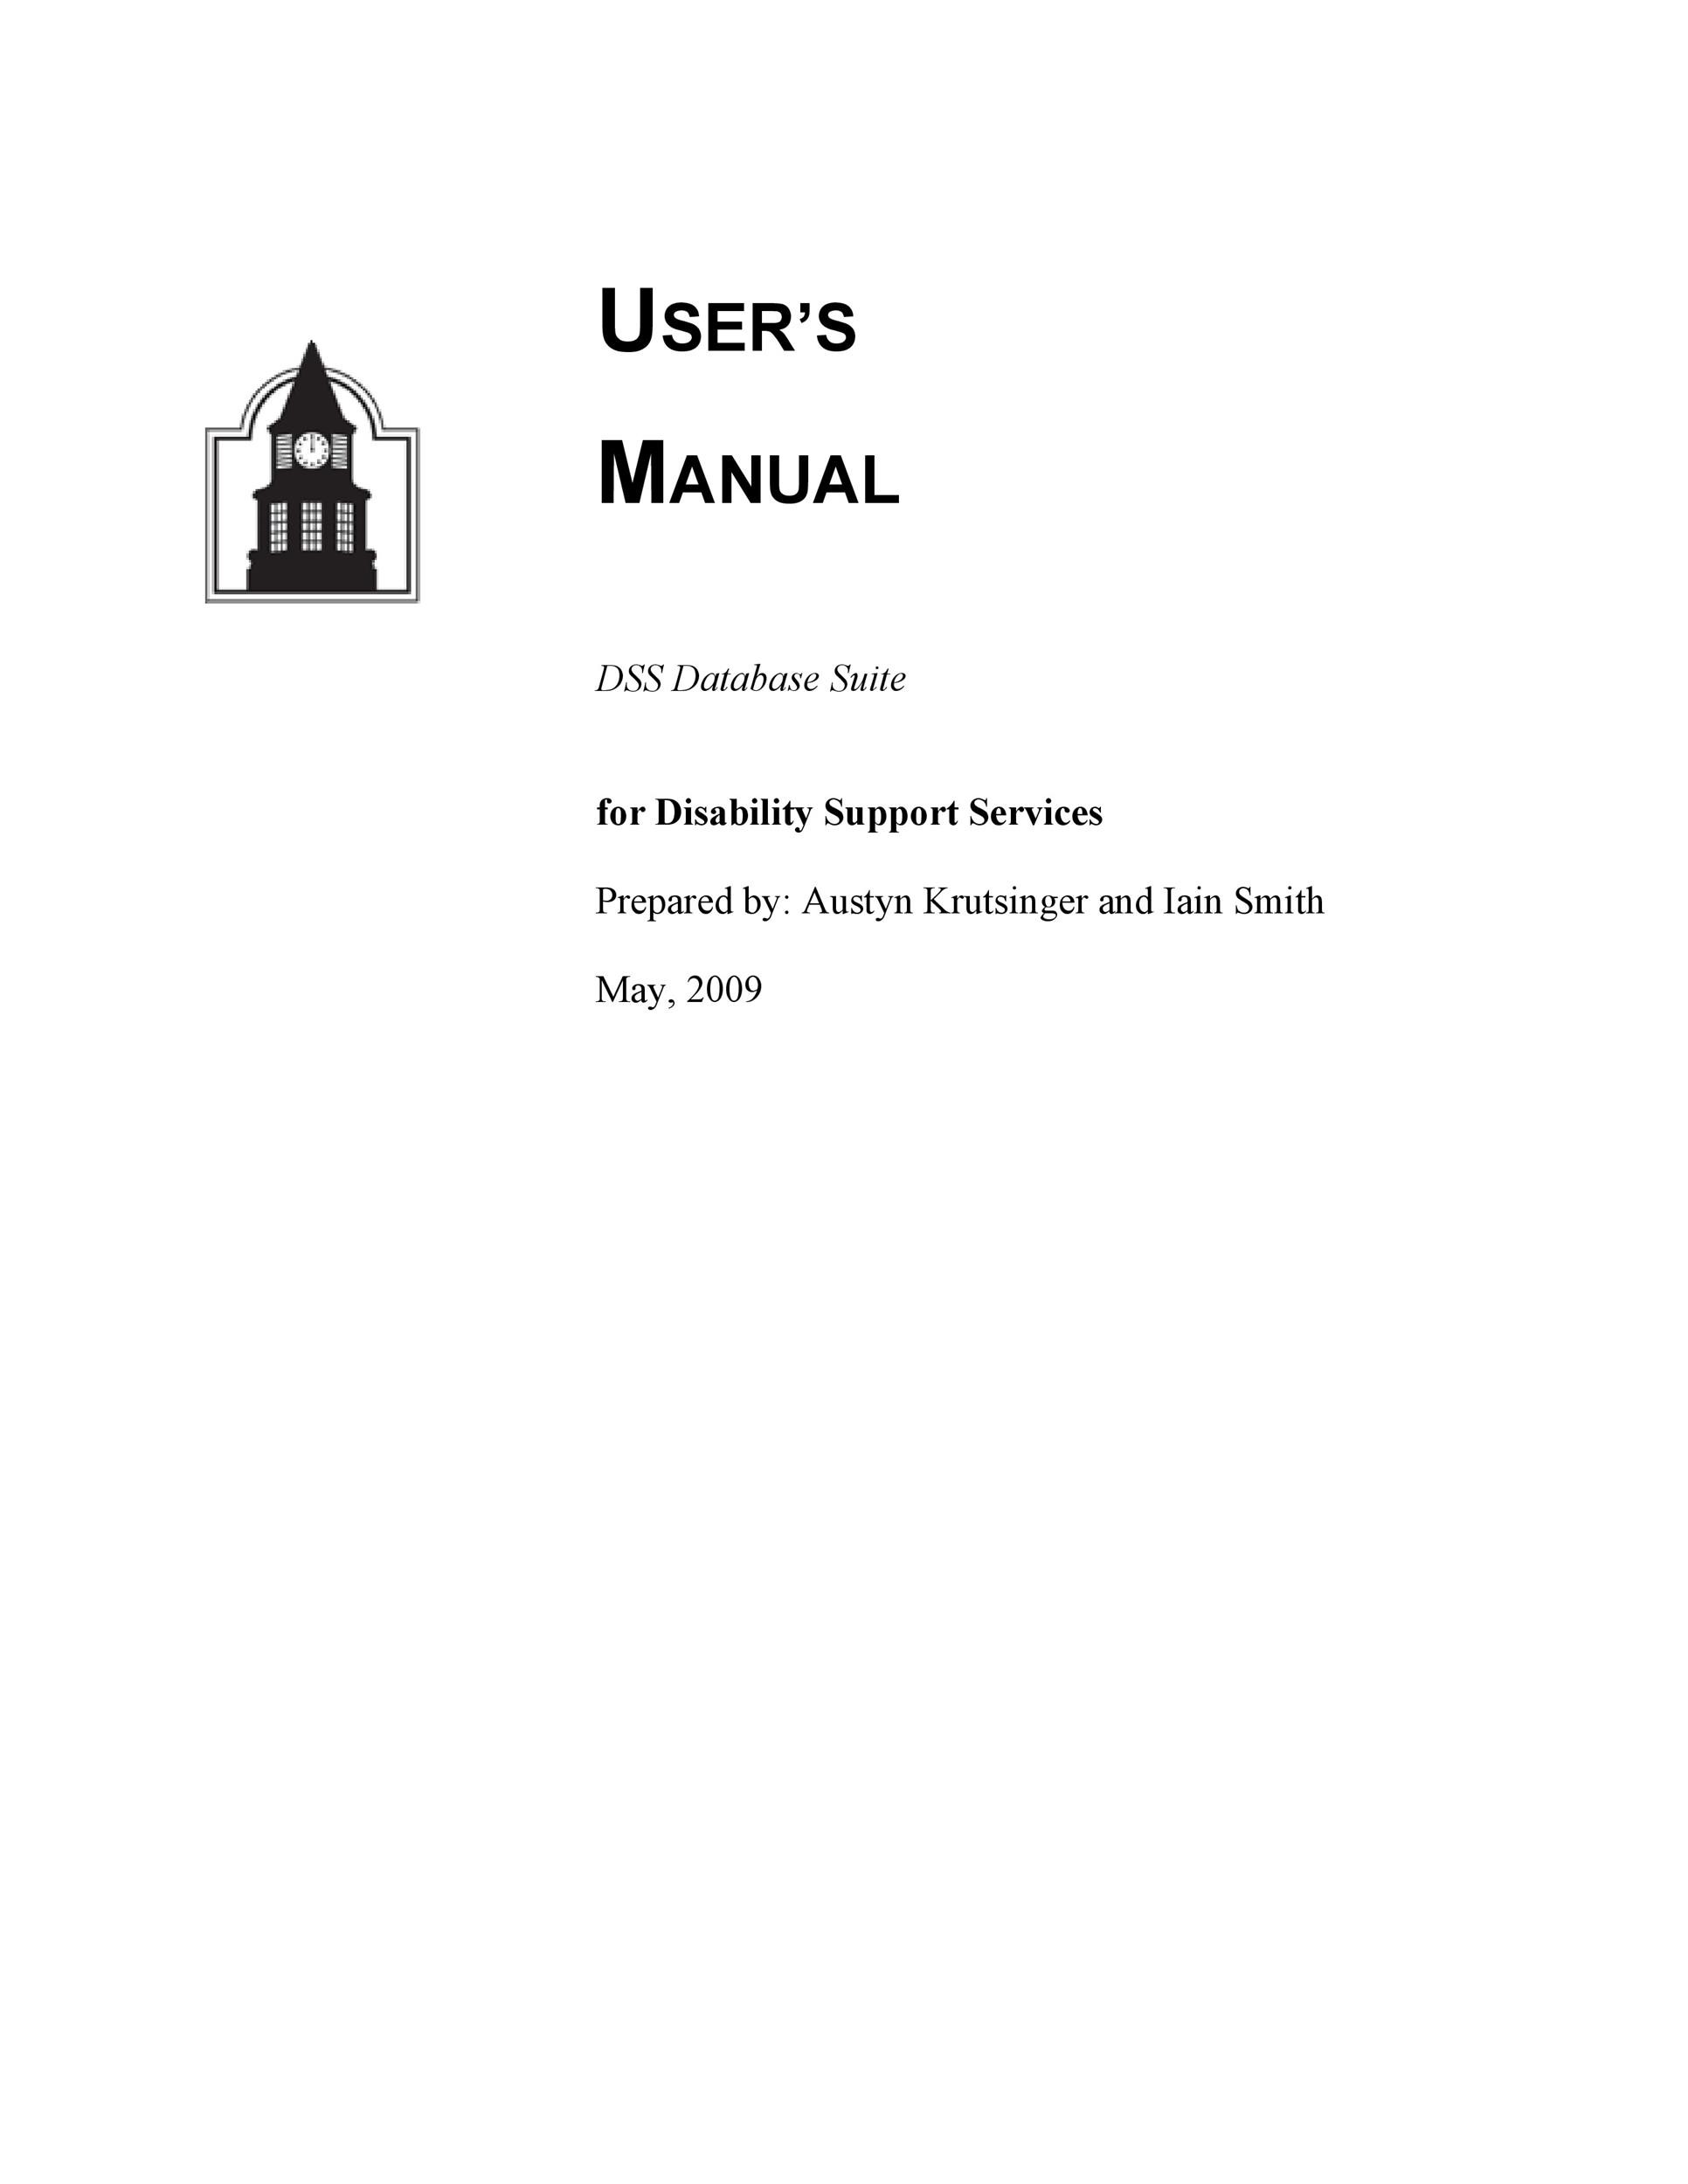 Free instruction manual template 13